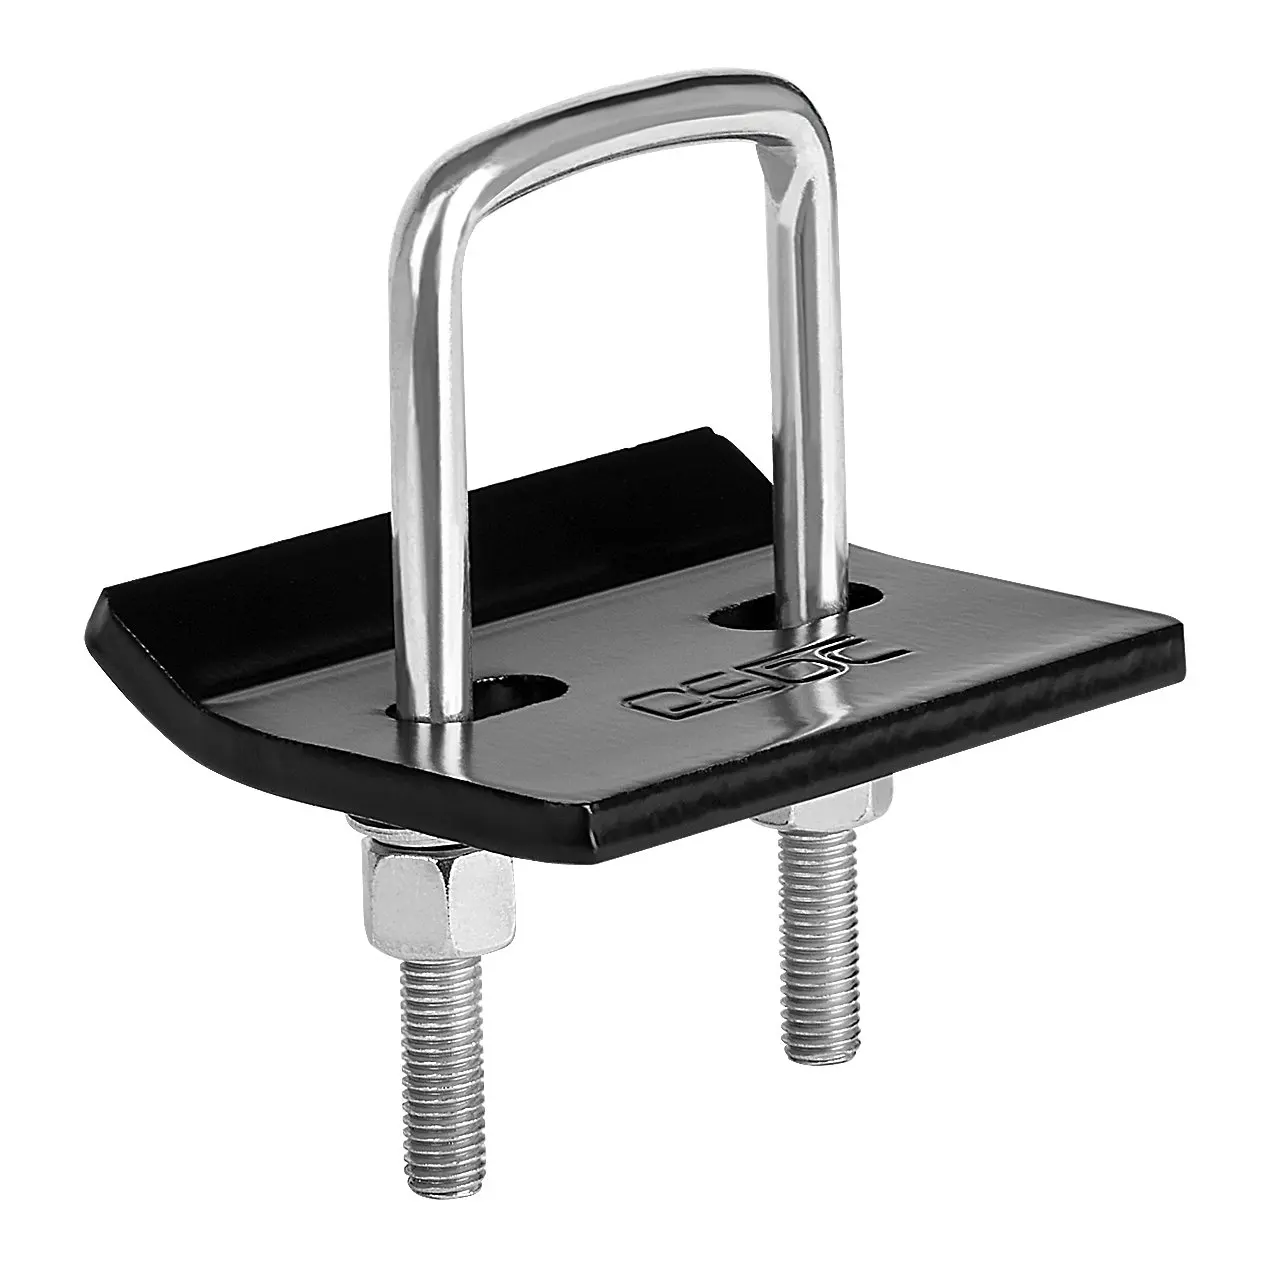 Buy DEDC Hitch Tightener for 2inch Hitches, Anti-Rattle Hitch ...